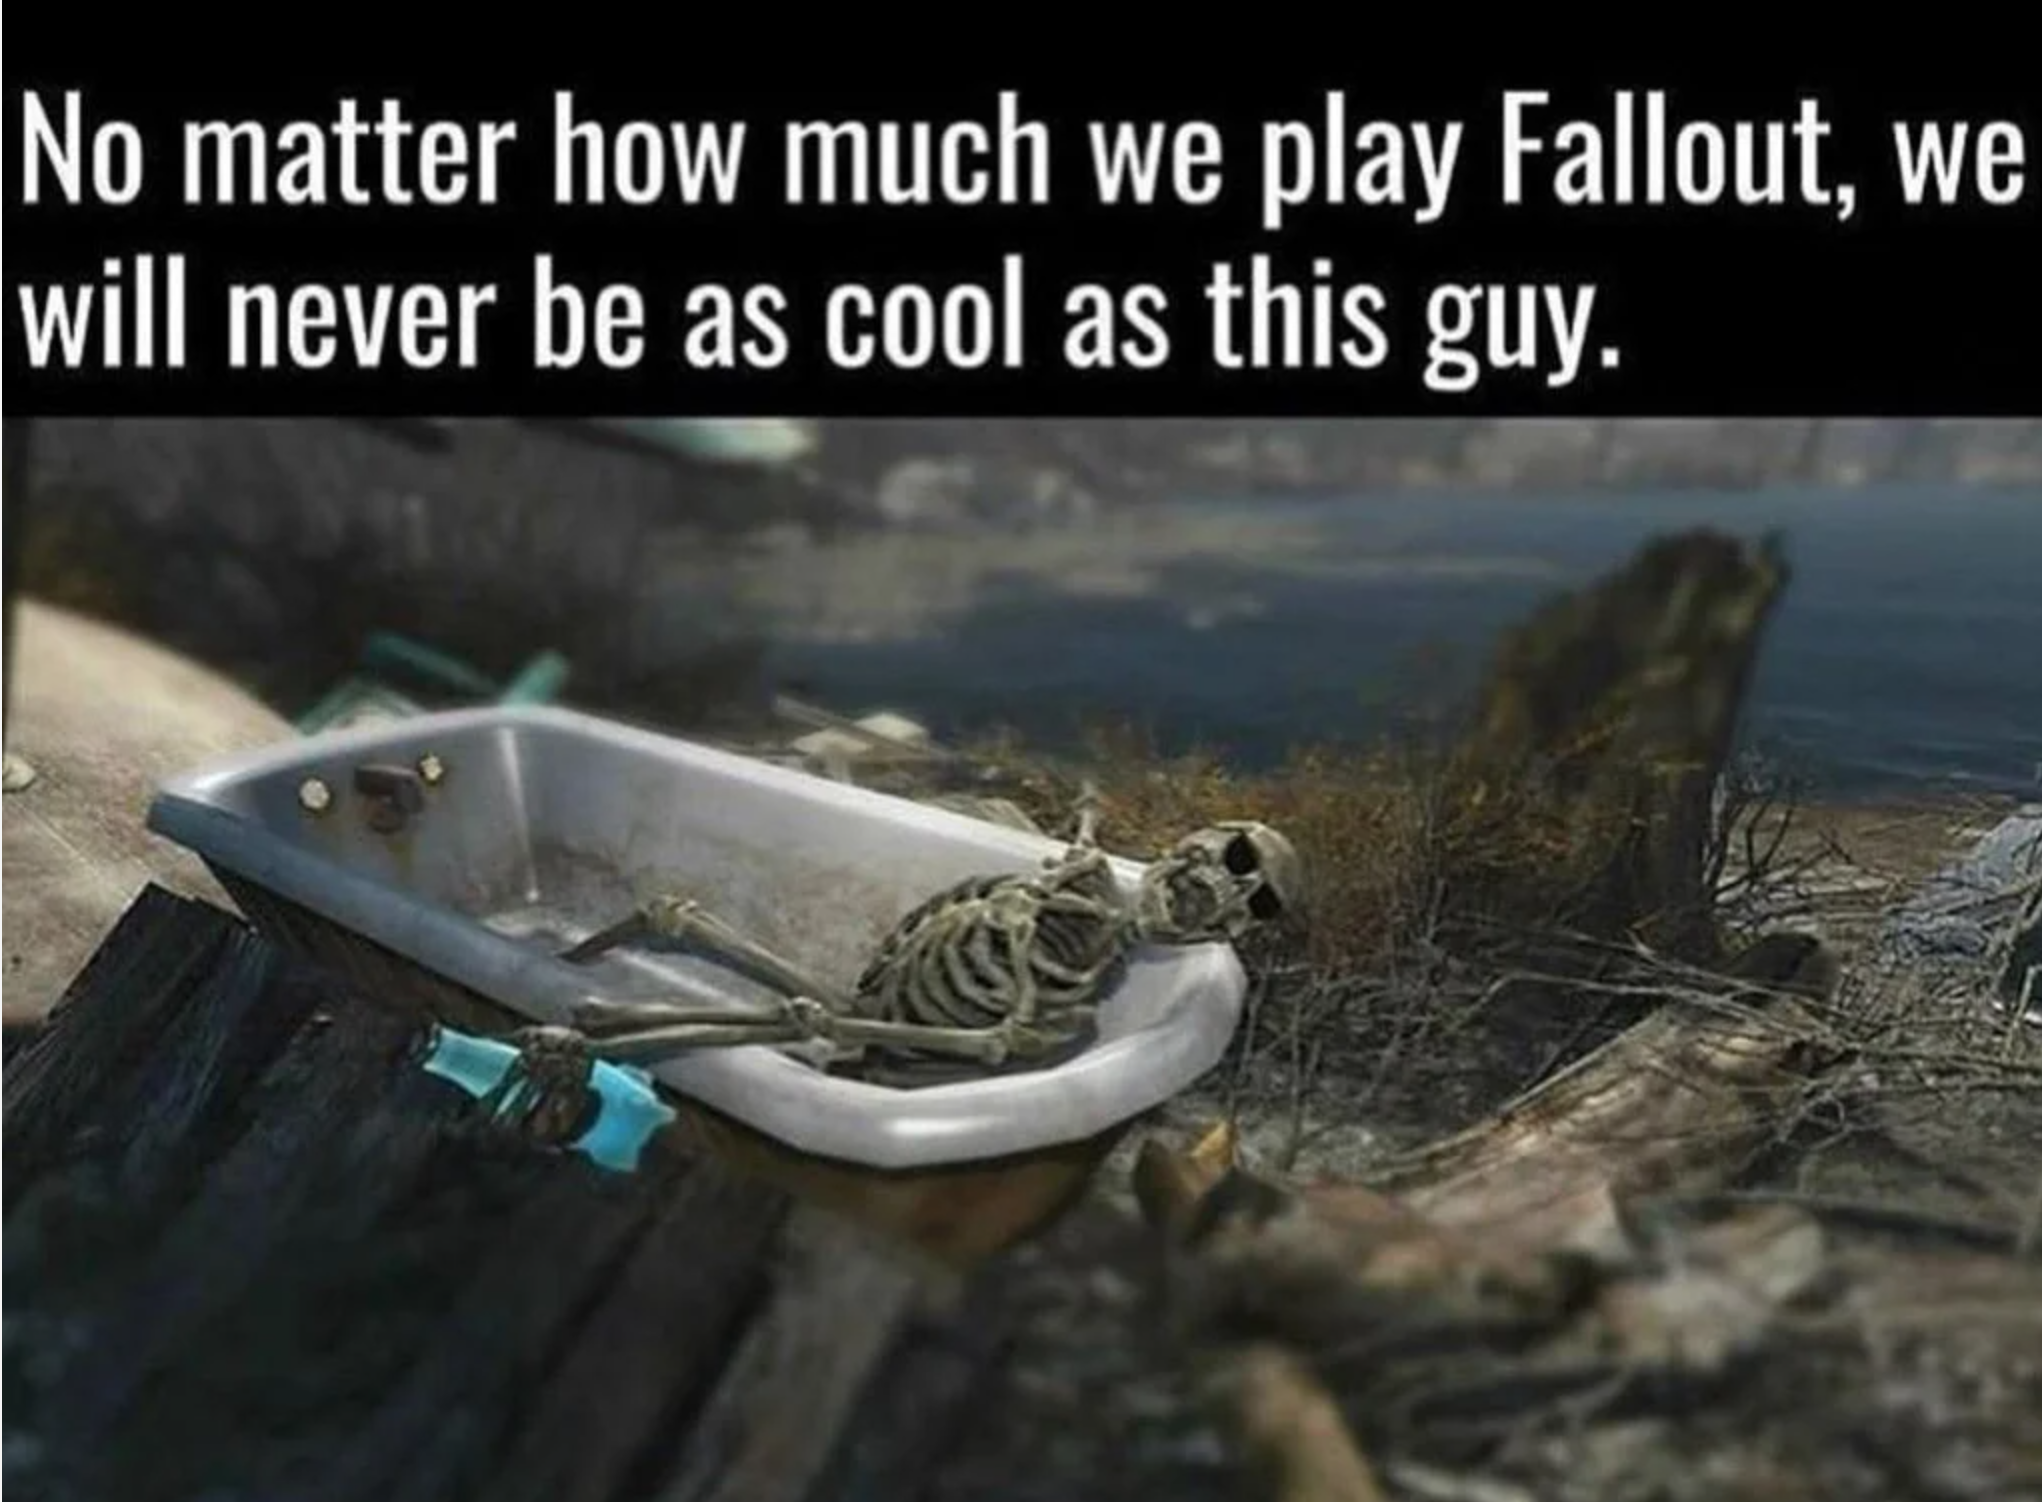 funny gaming memes - water resources - No matter how much we play Fallout, we will never be as cool as this guy.